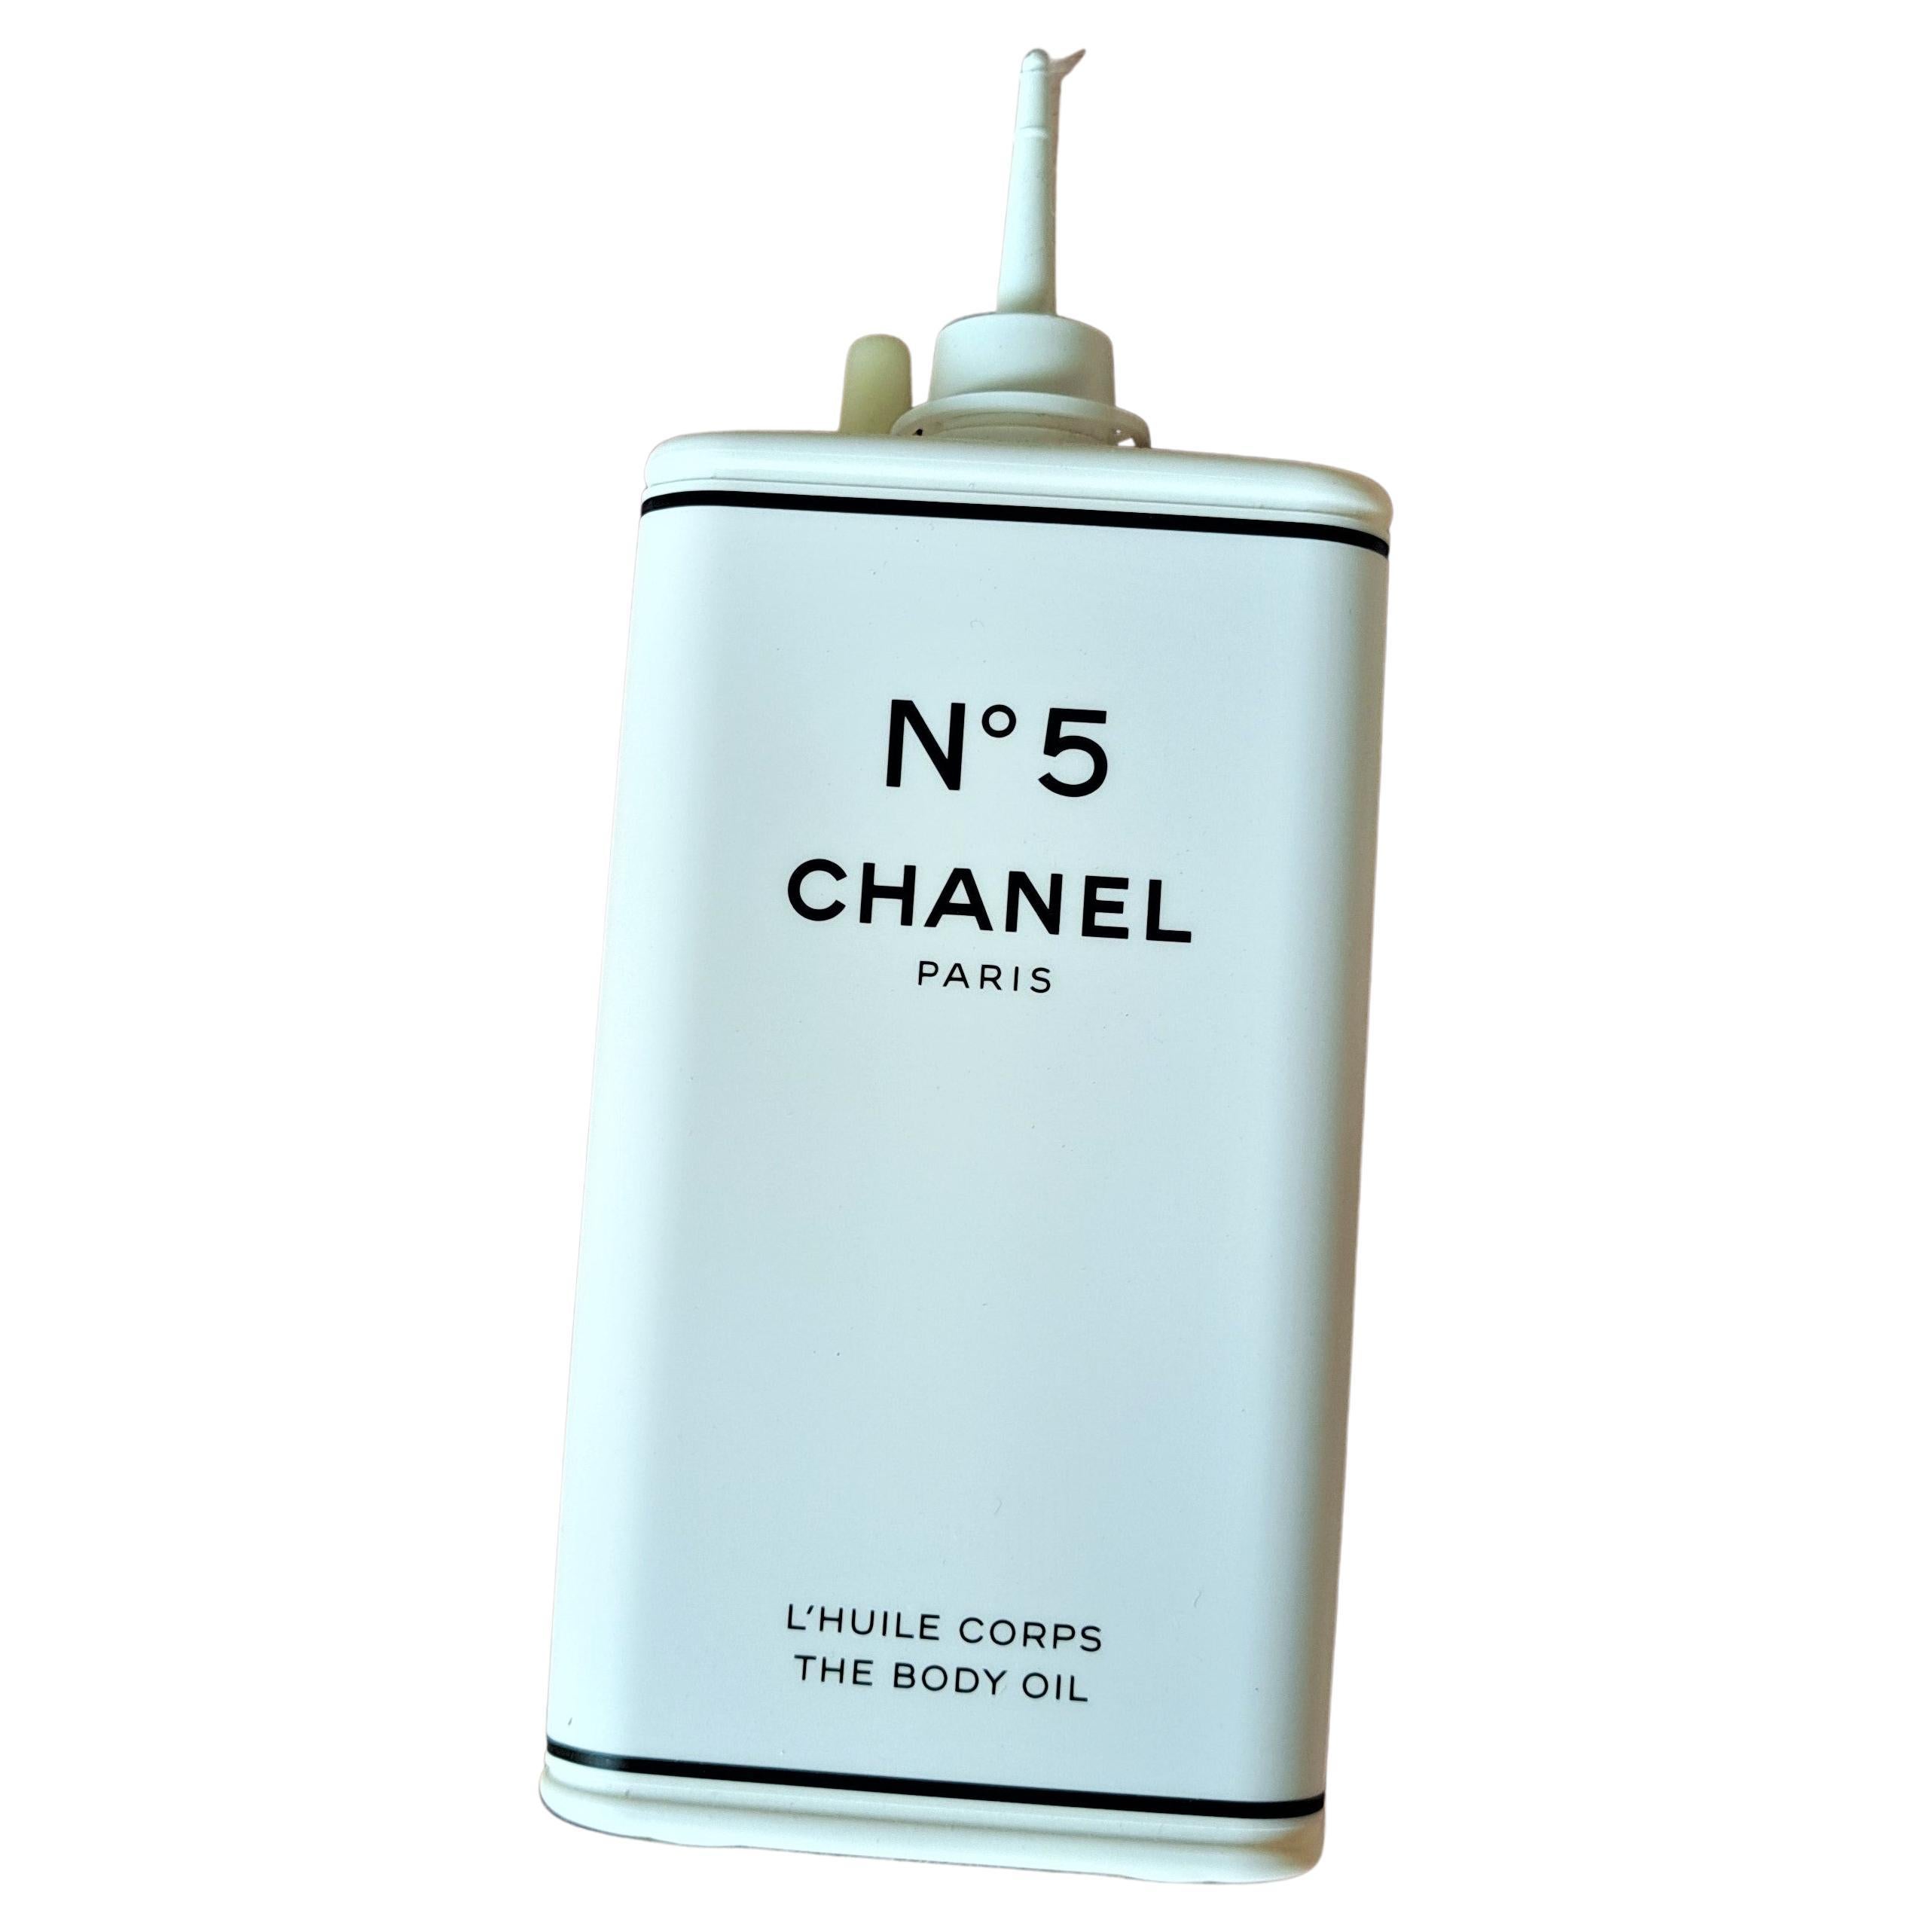 Chanel N°5 Factory Collection Limited Edition The Body Oil & Hair New For Sale